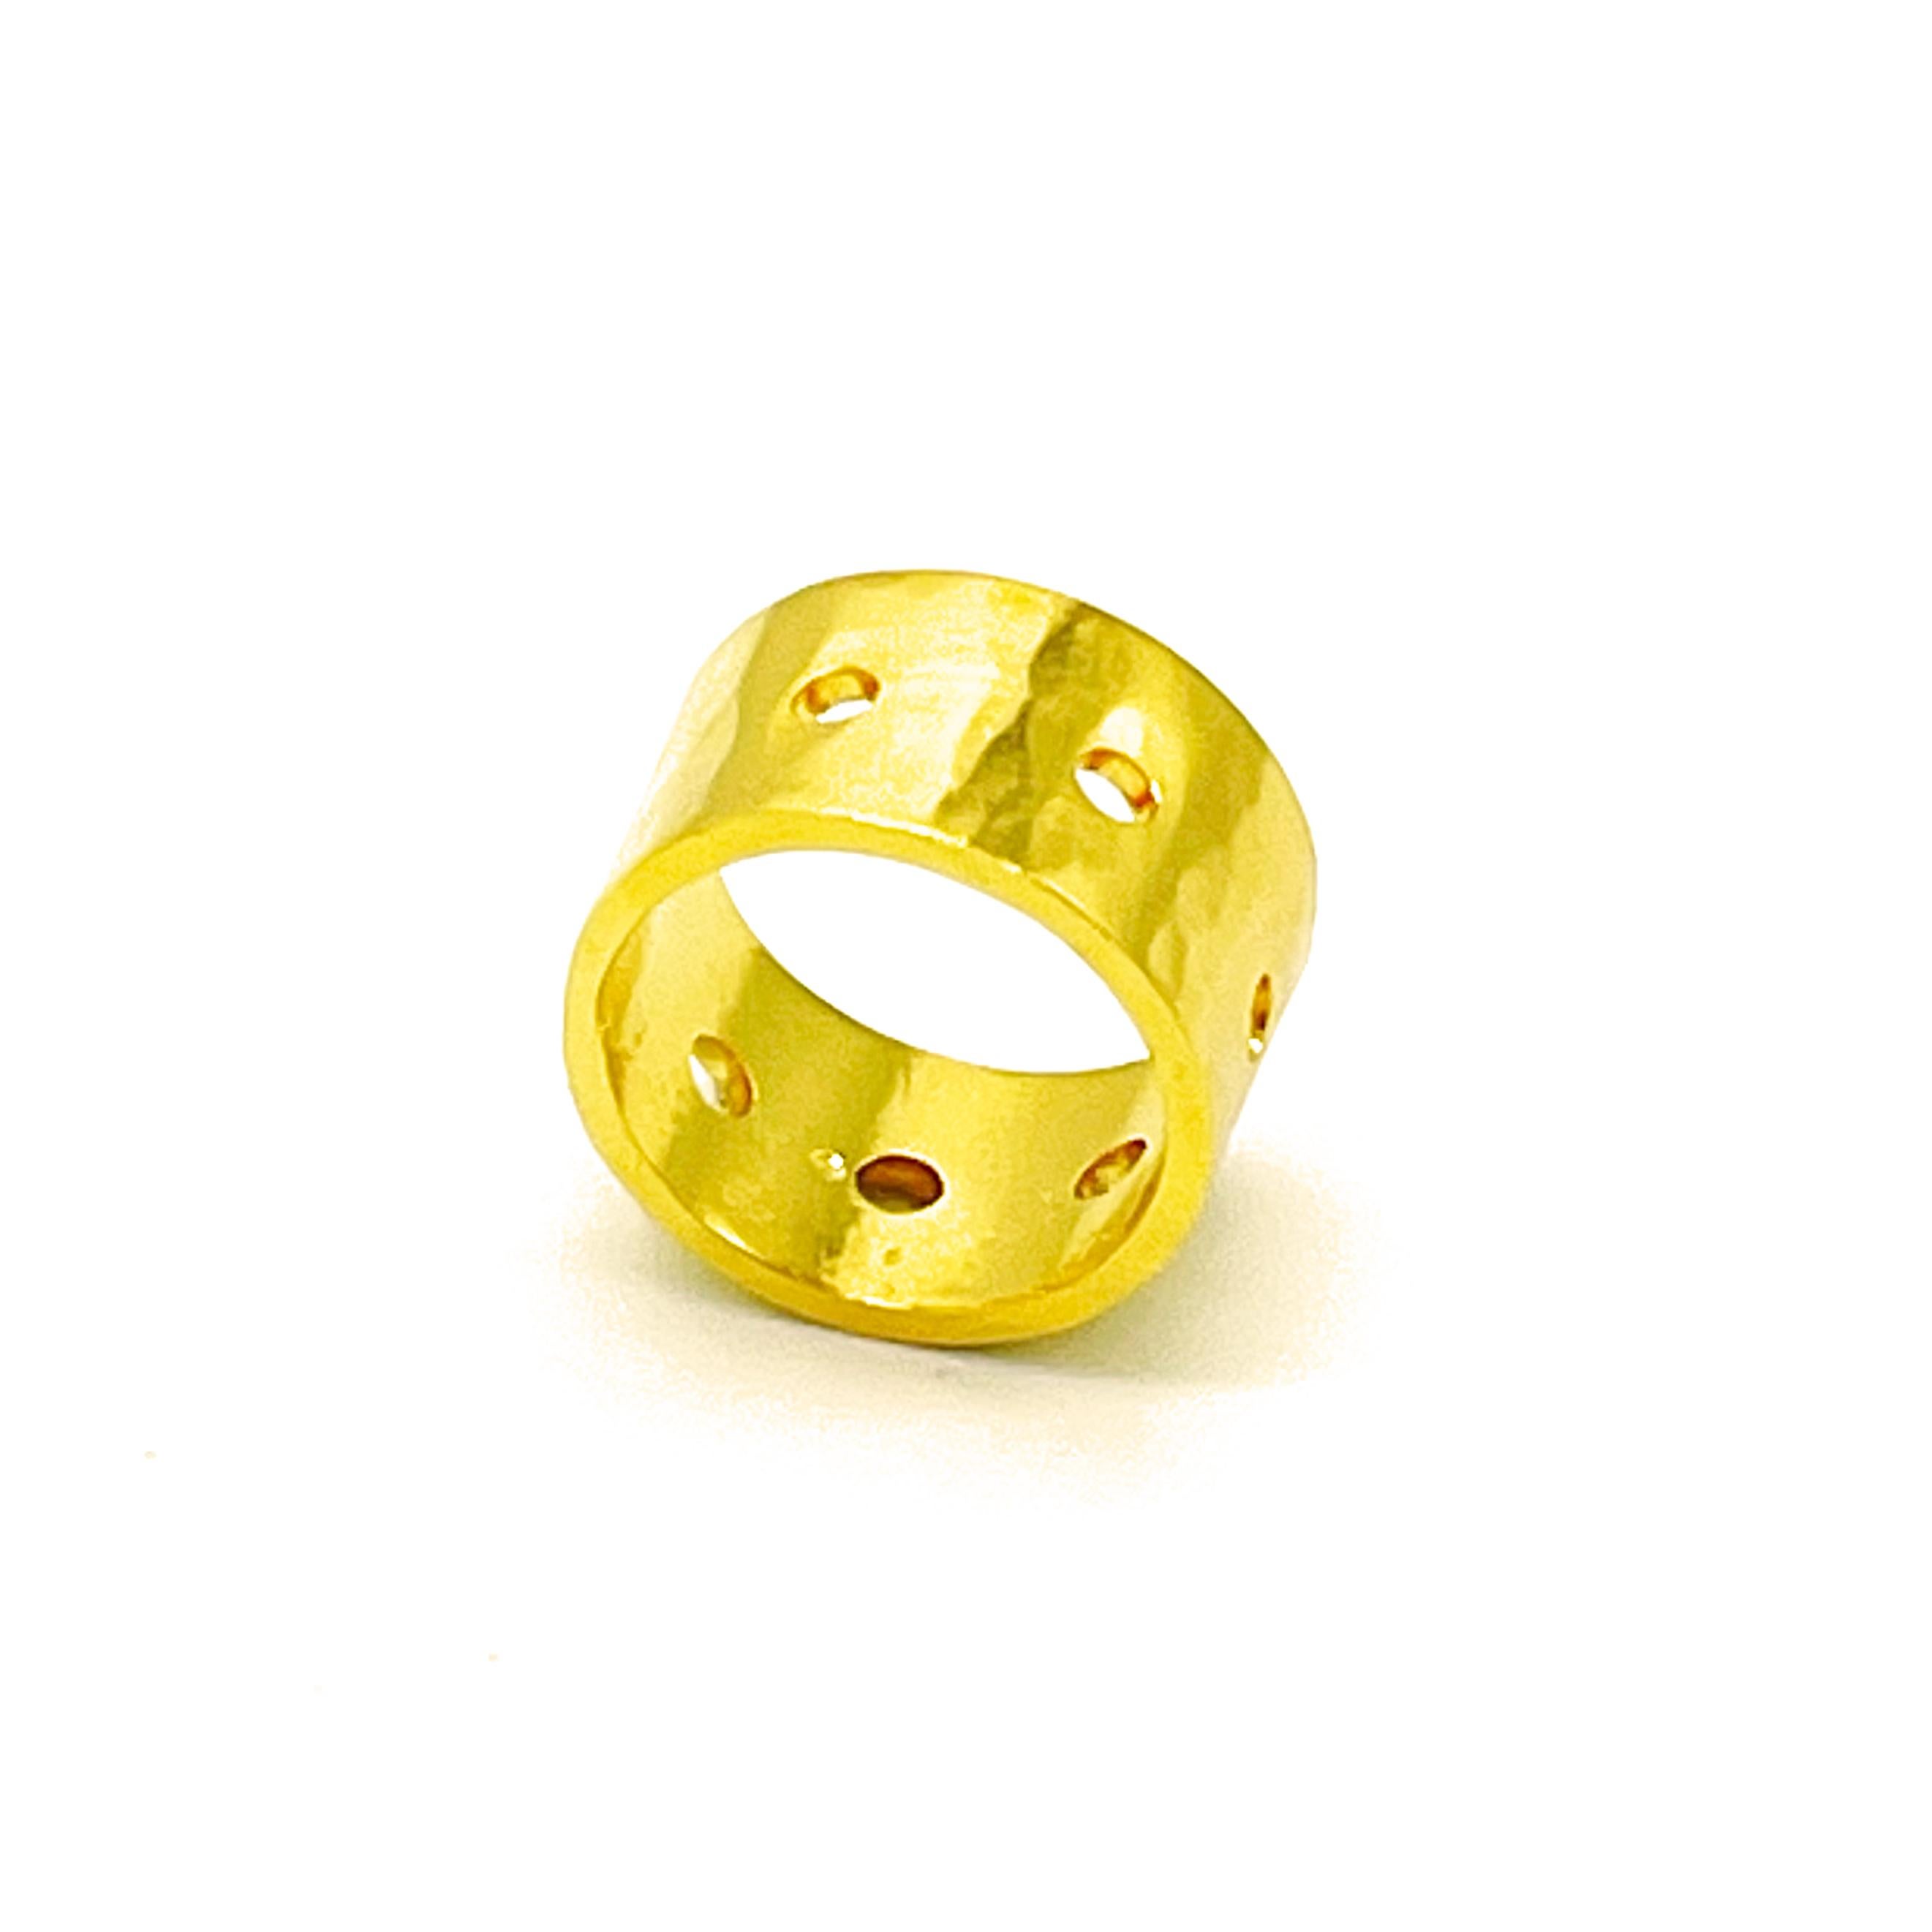 From refined, timeless shapes to modern characters with edge meet JASMINE - handcrafted and shape may vary slightly making pieces one of a kind. This ring band is sure to put style in your hands. Available in different finishes. It is an open band